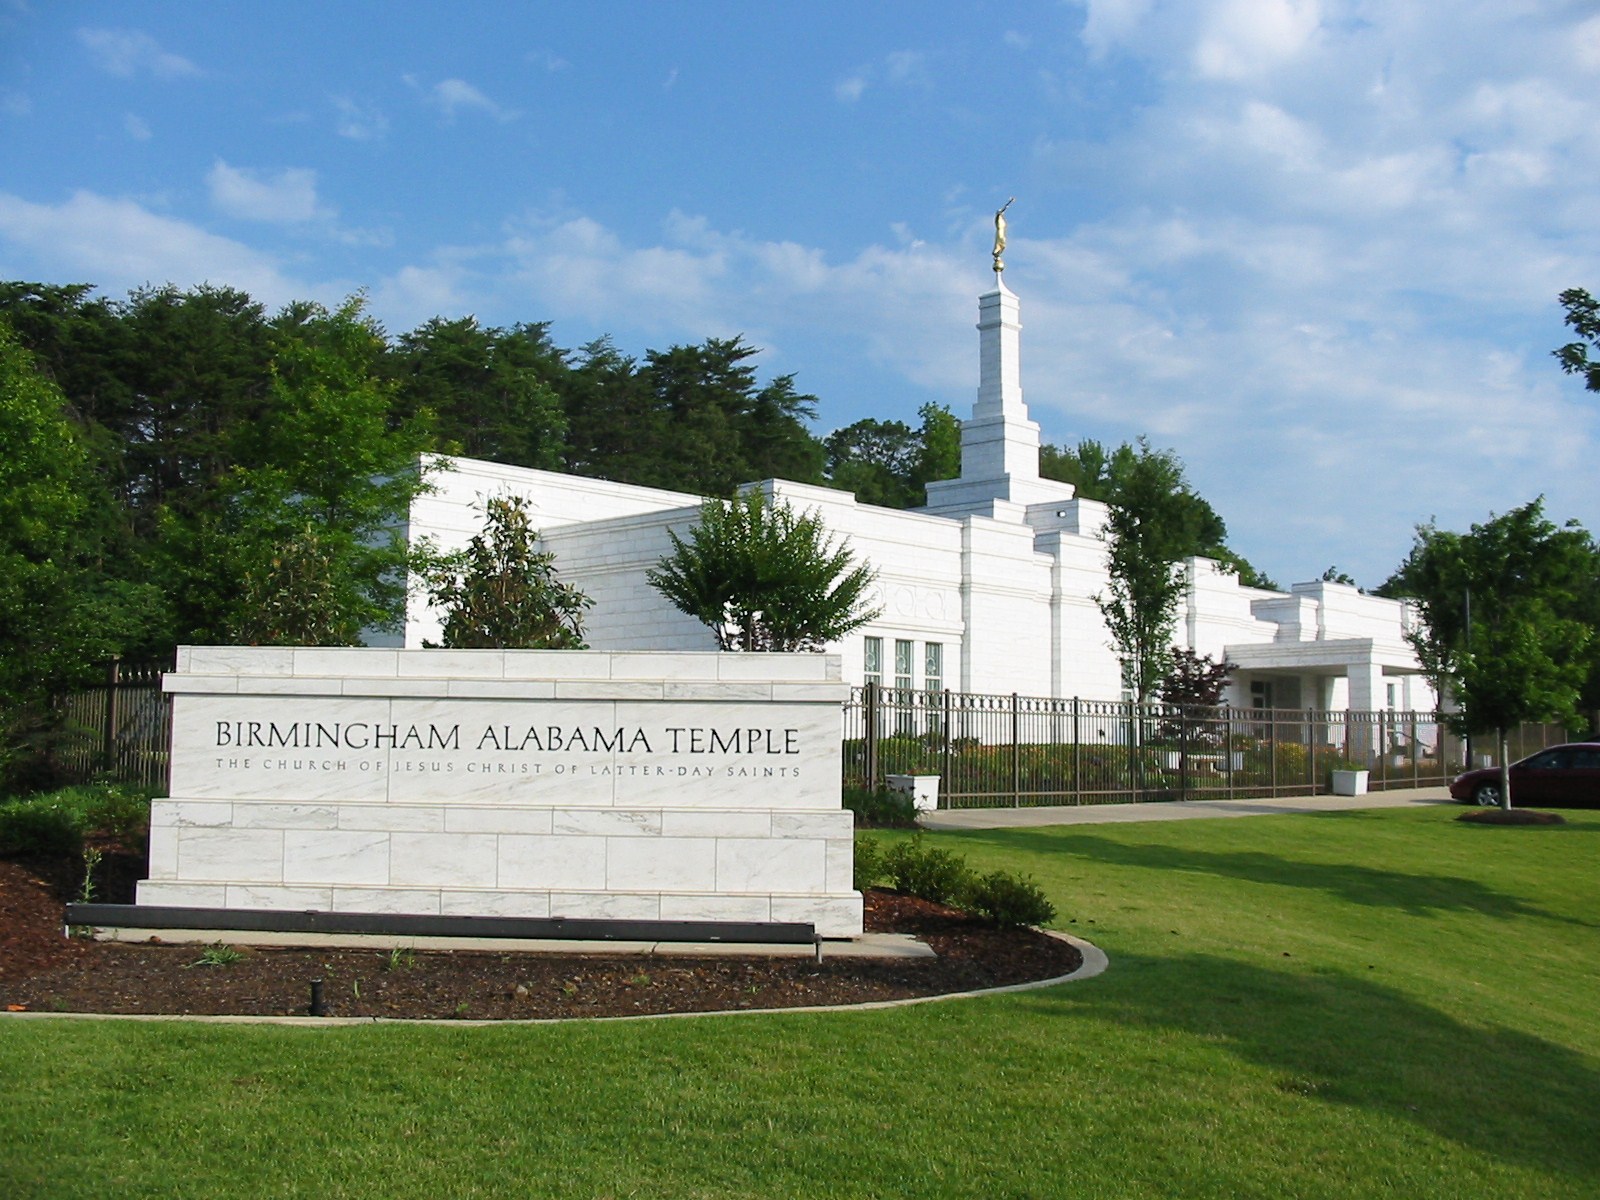 The Birmingham Alabama Temple, a white building with a steeple topped by a golden statue of an angel blowing a trumpet.